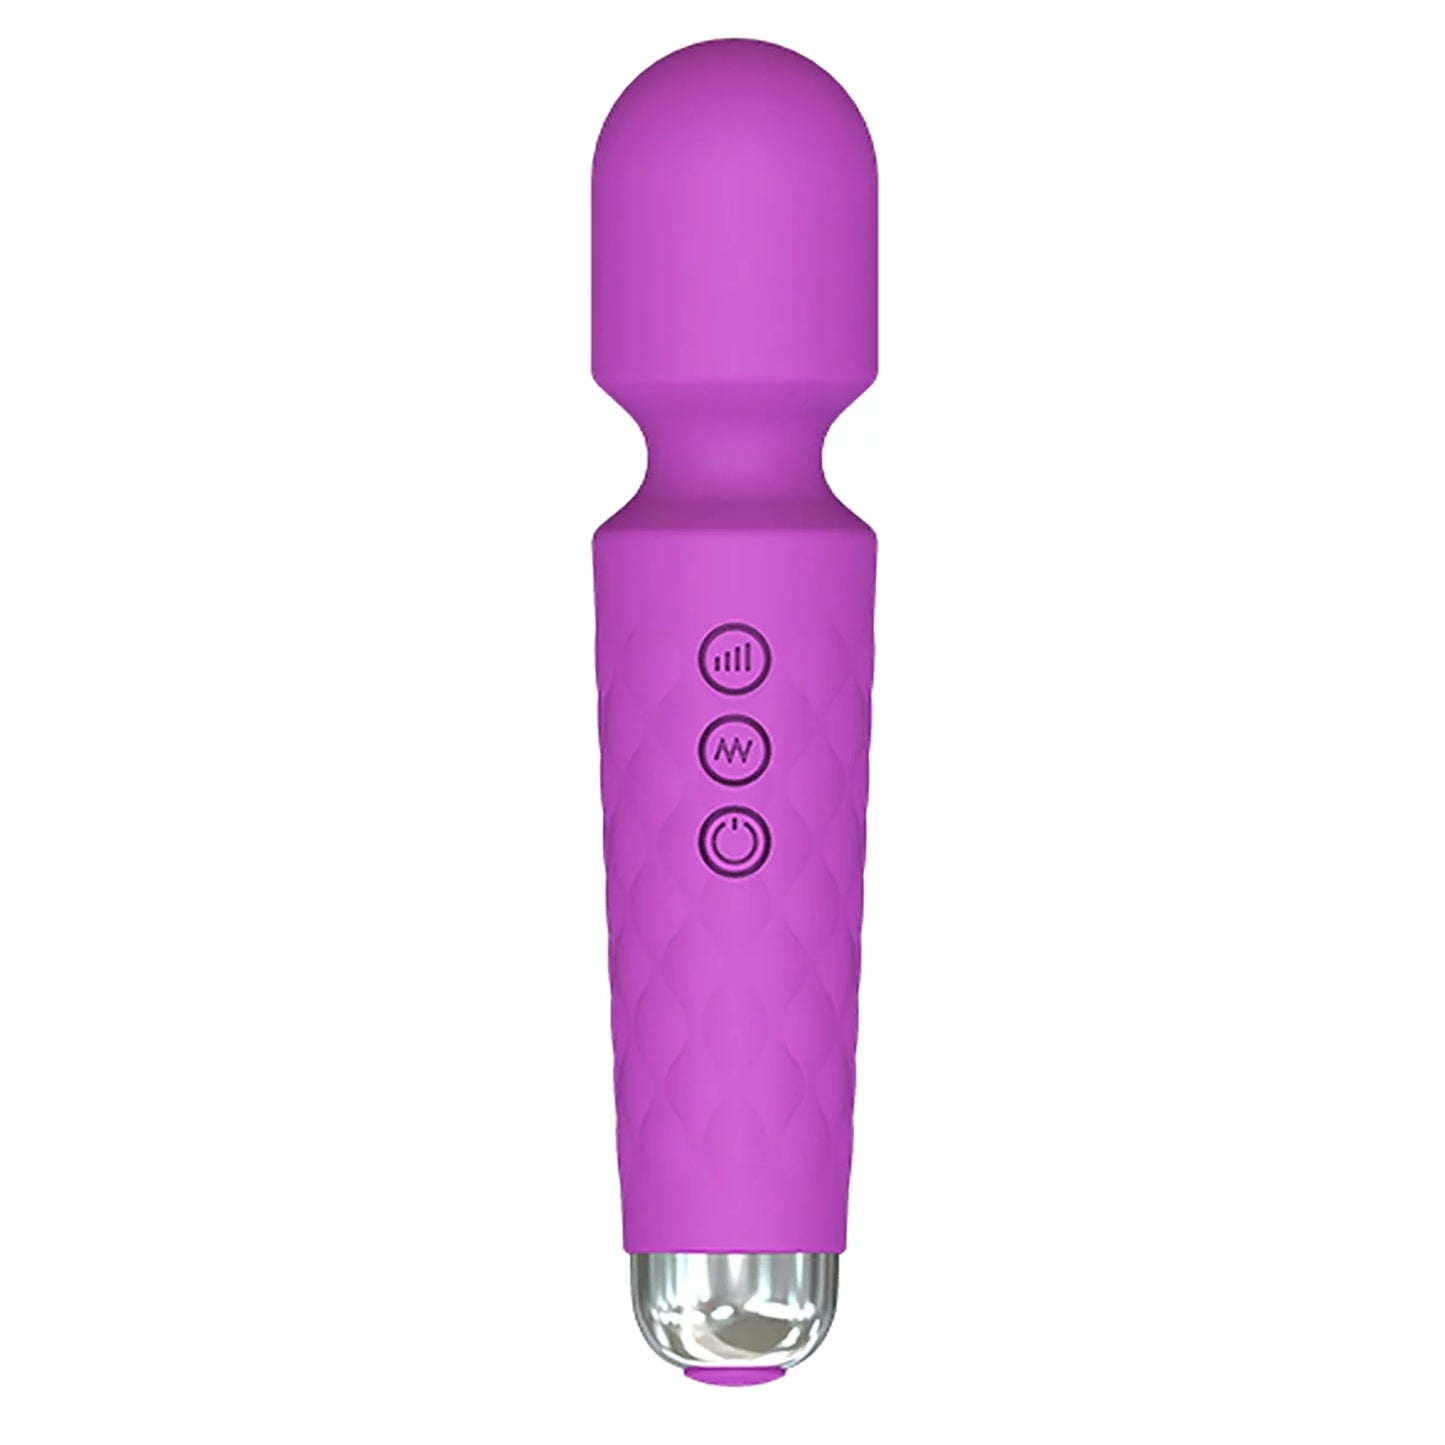 Vibrator Wand with 8 Speeds 20 Vibration Modes, Personal Massager